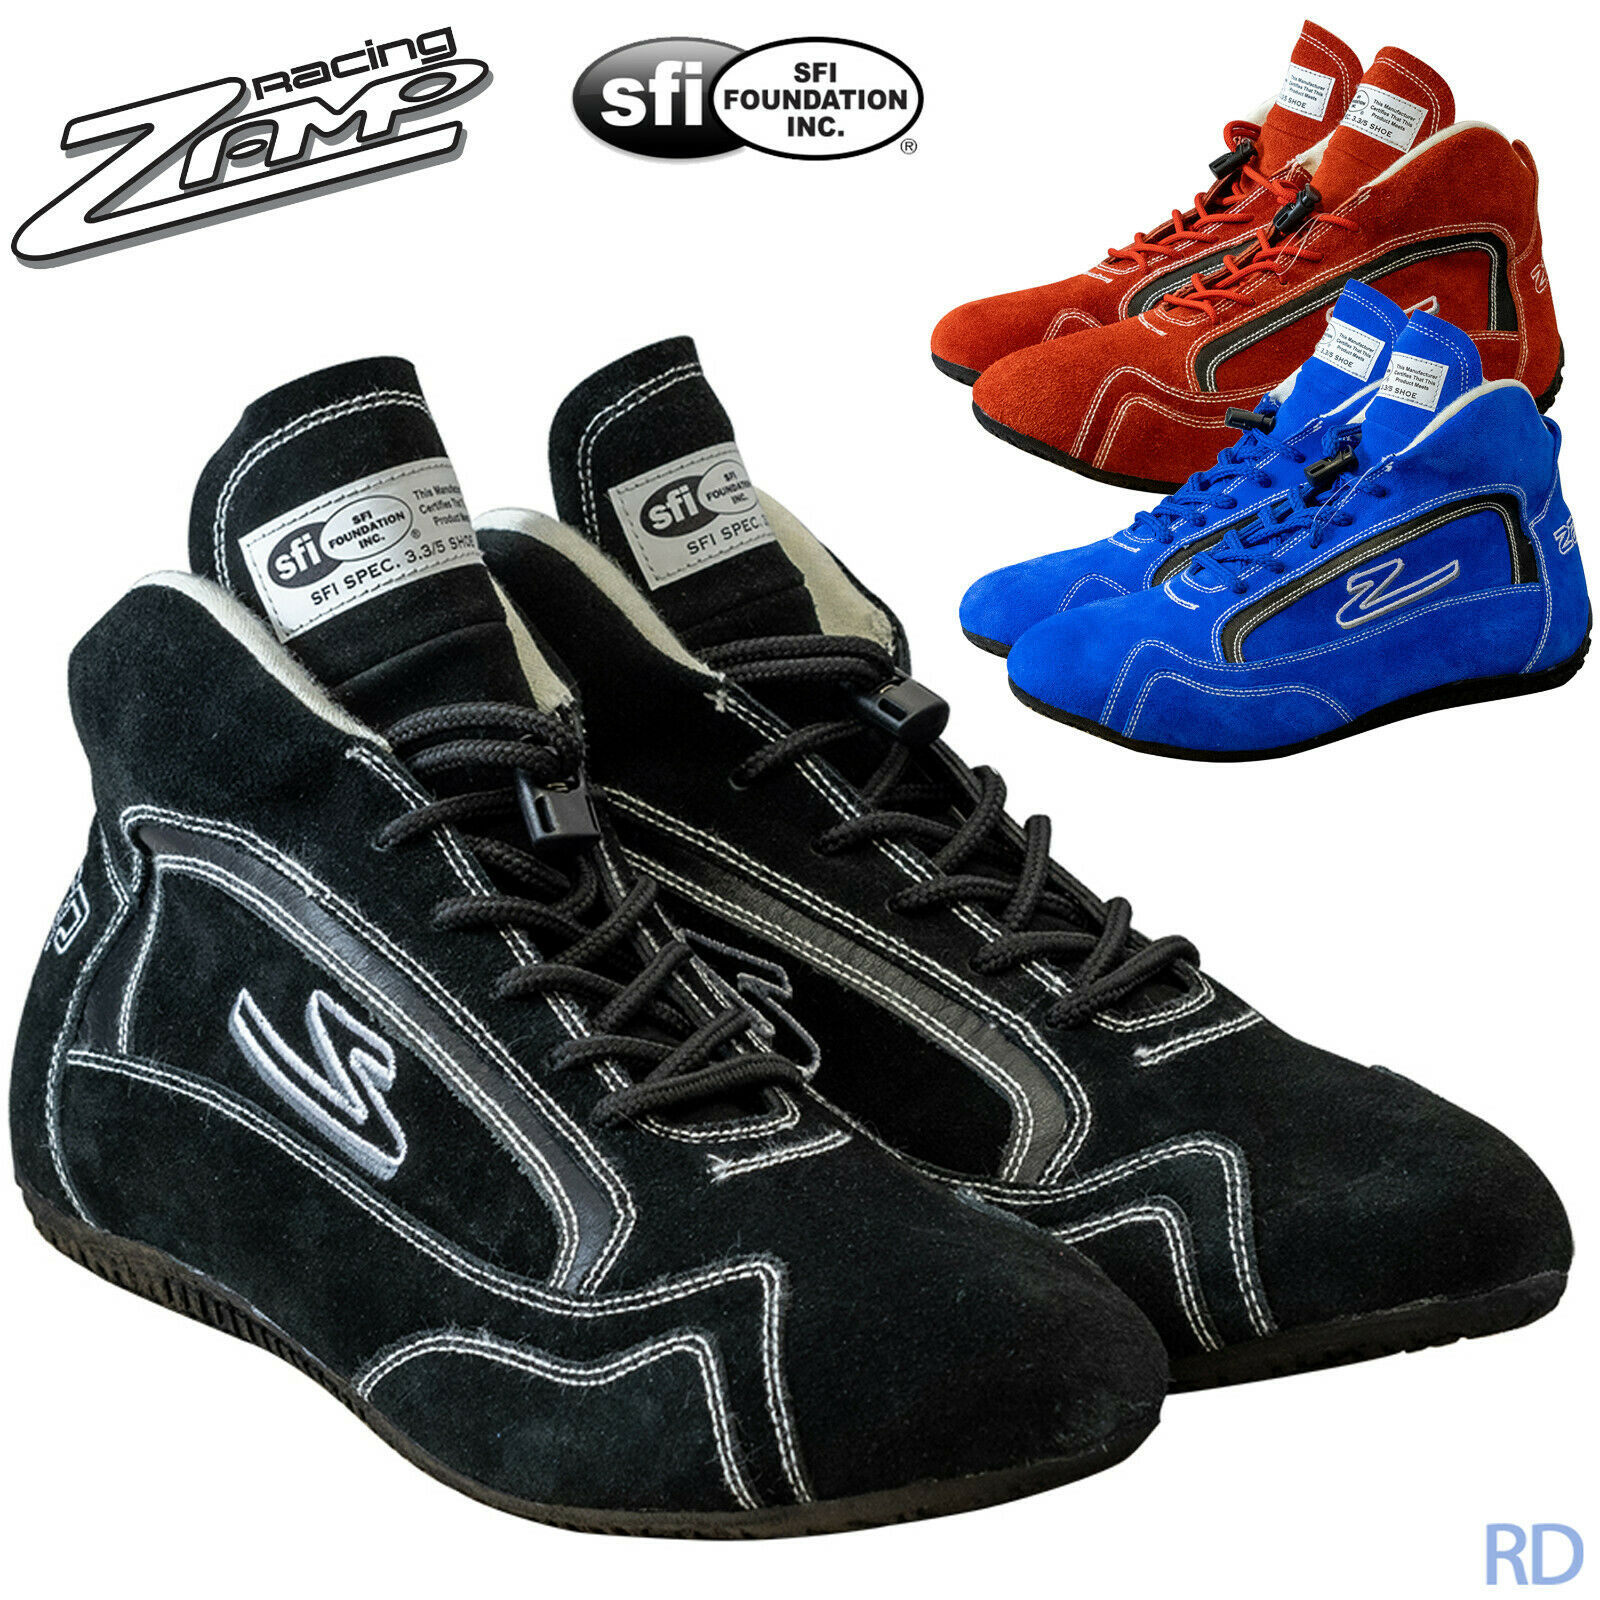 Zamp - Zr-30 Sfi-5 Auto Racing Shoes - Sfi Rated Nomex Lightweight Suede Shoe